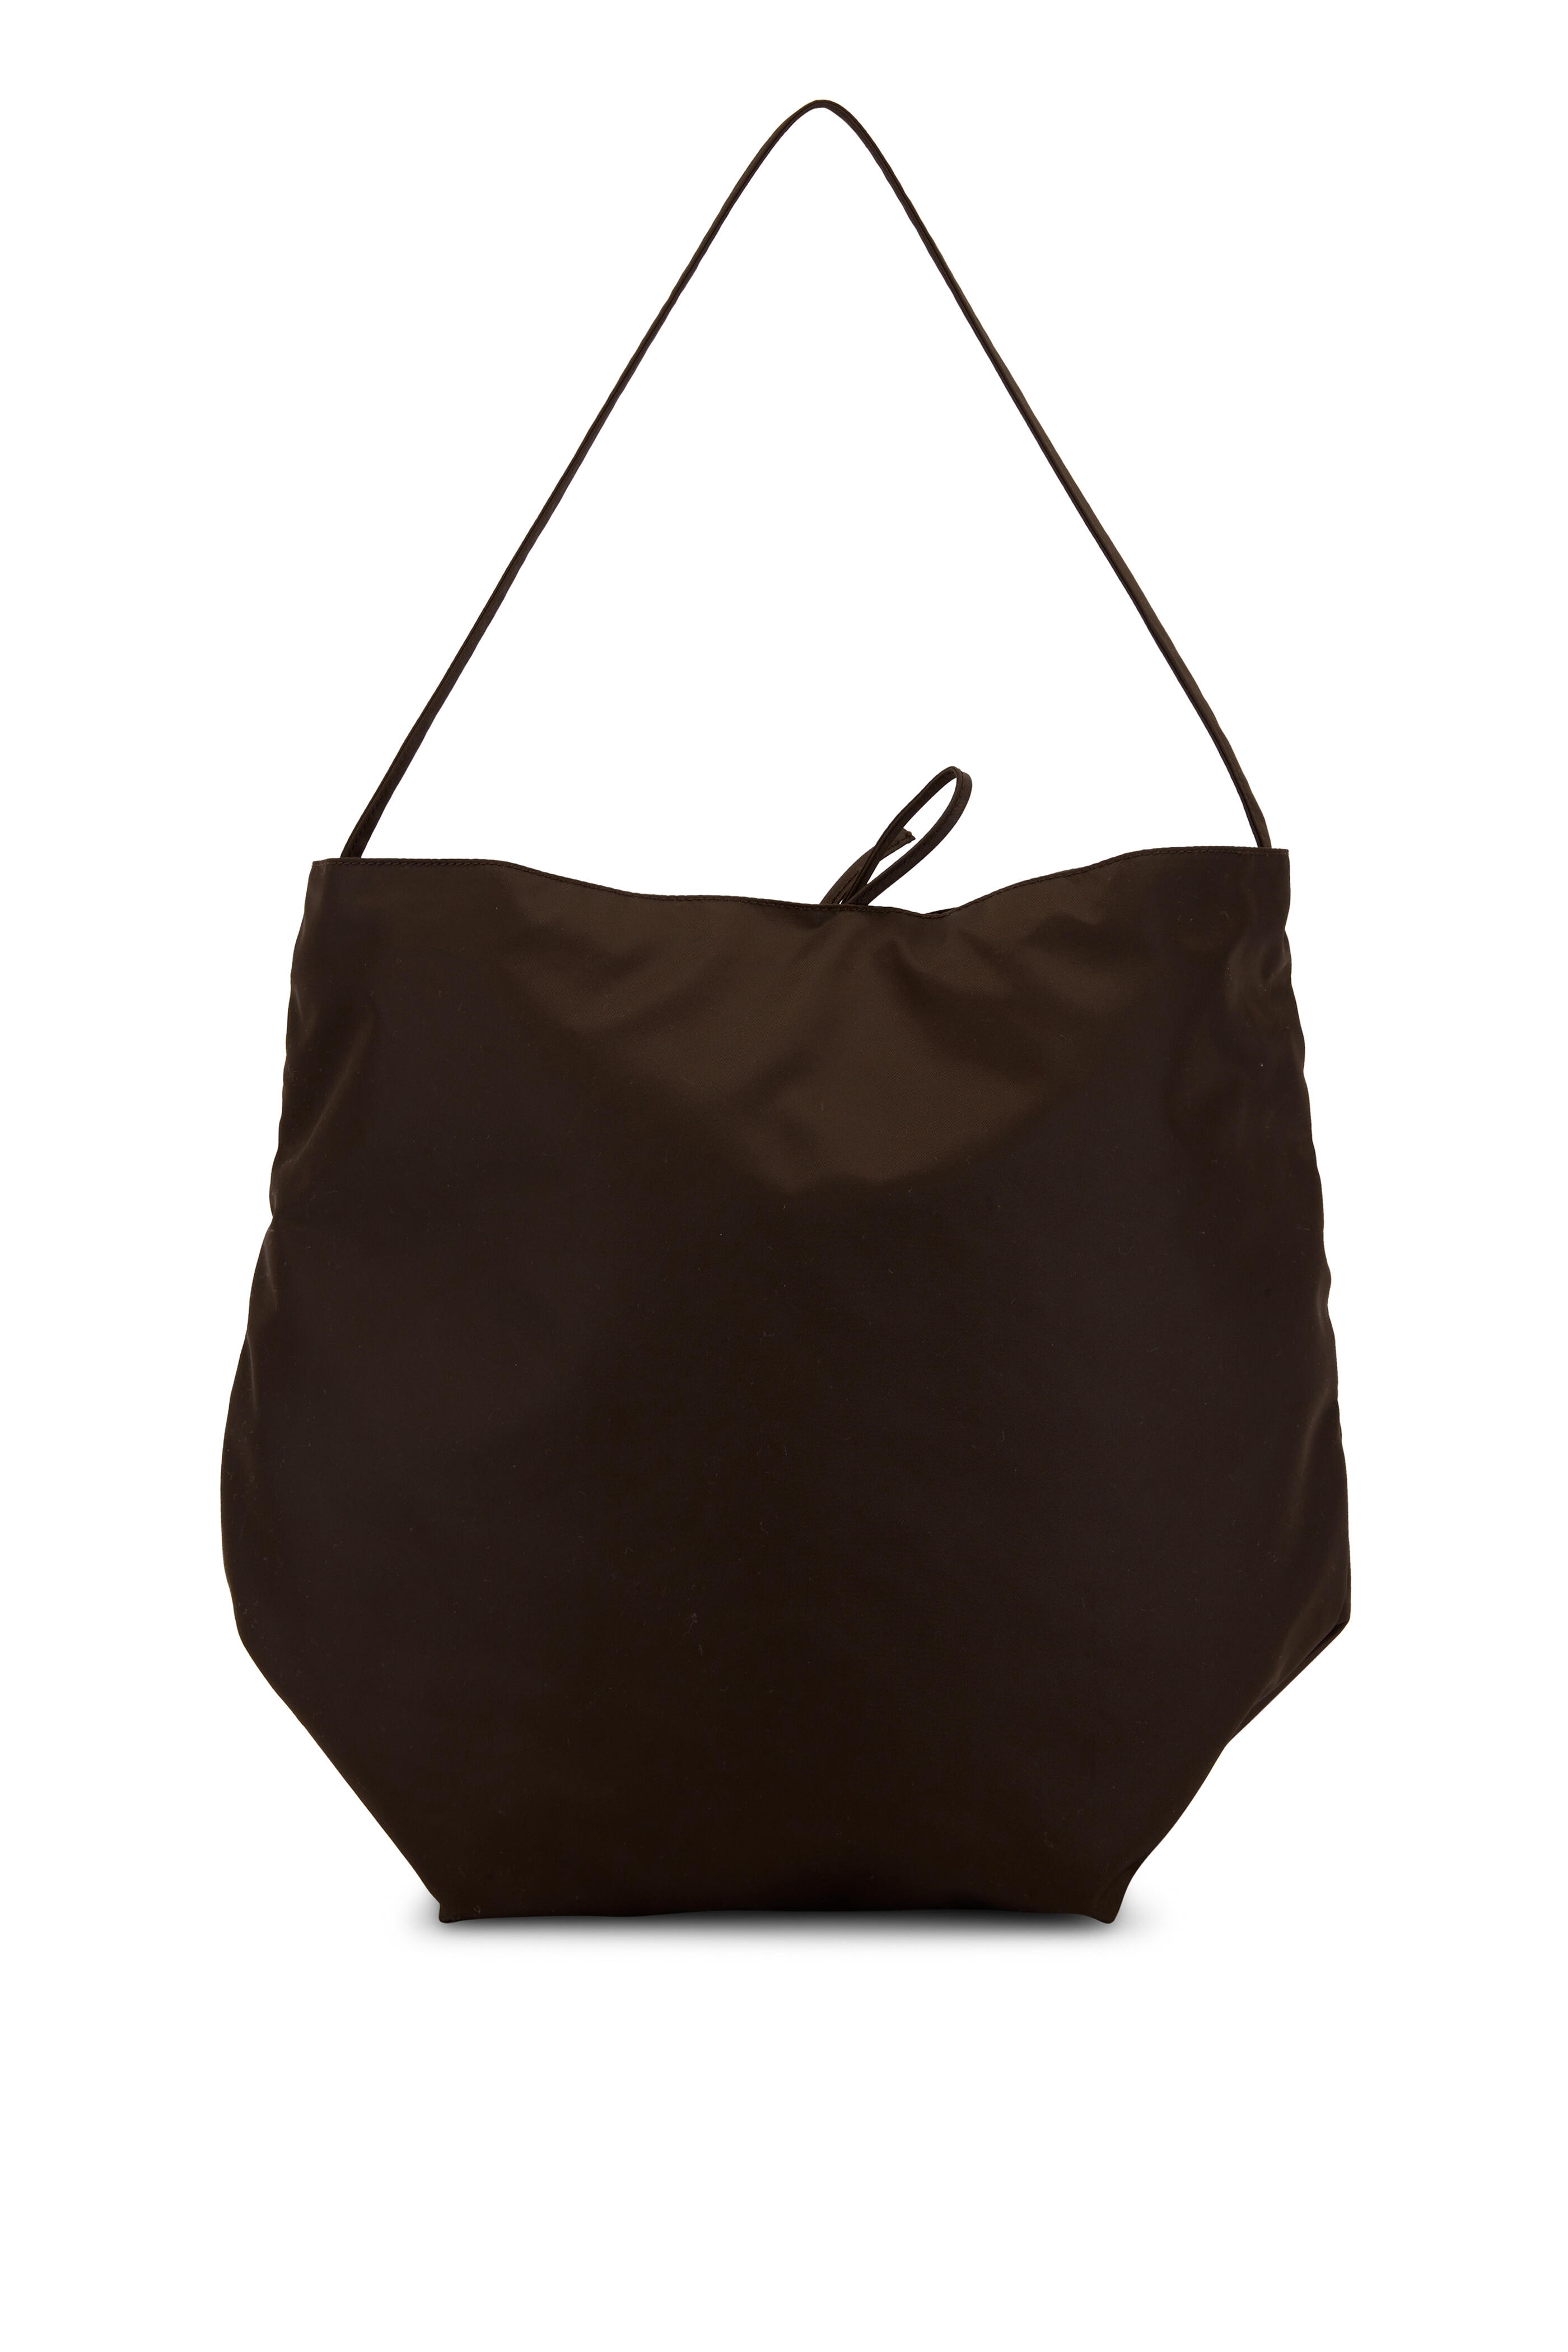 Park Three Leather Tote Bag in Brown - The Row